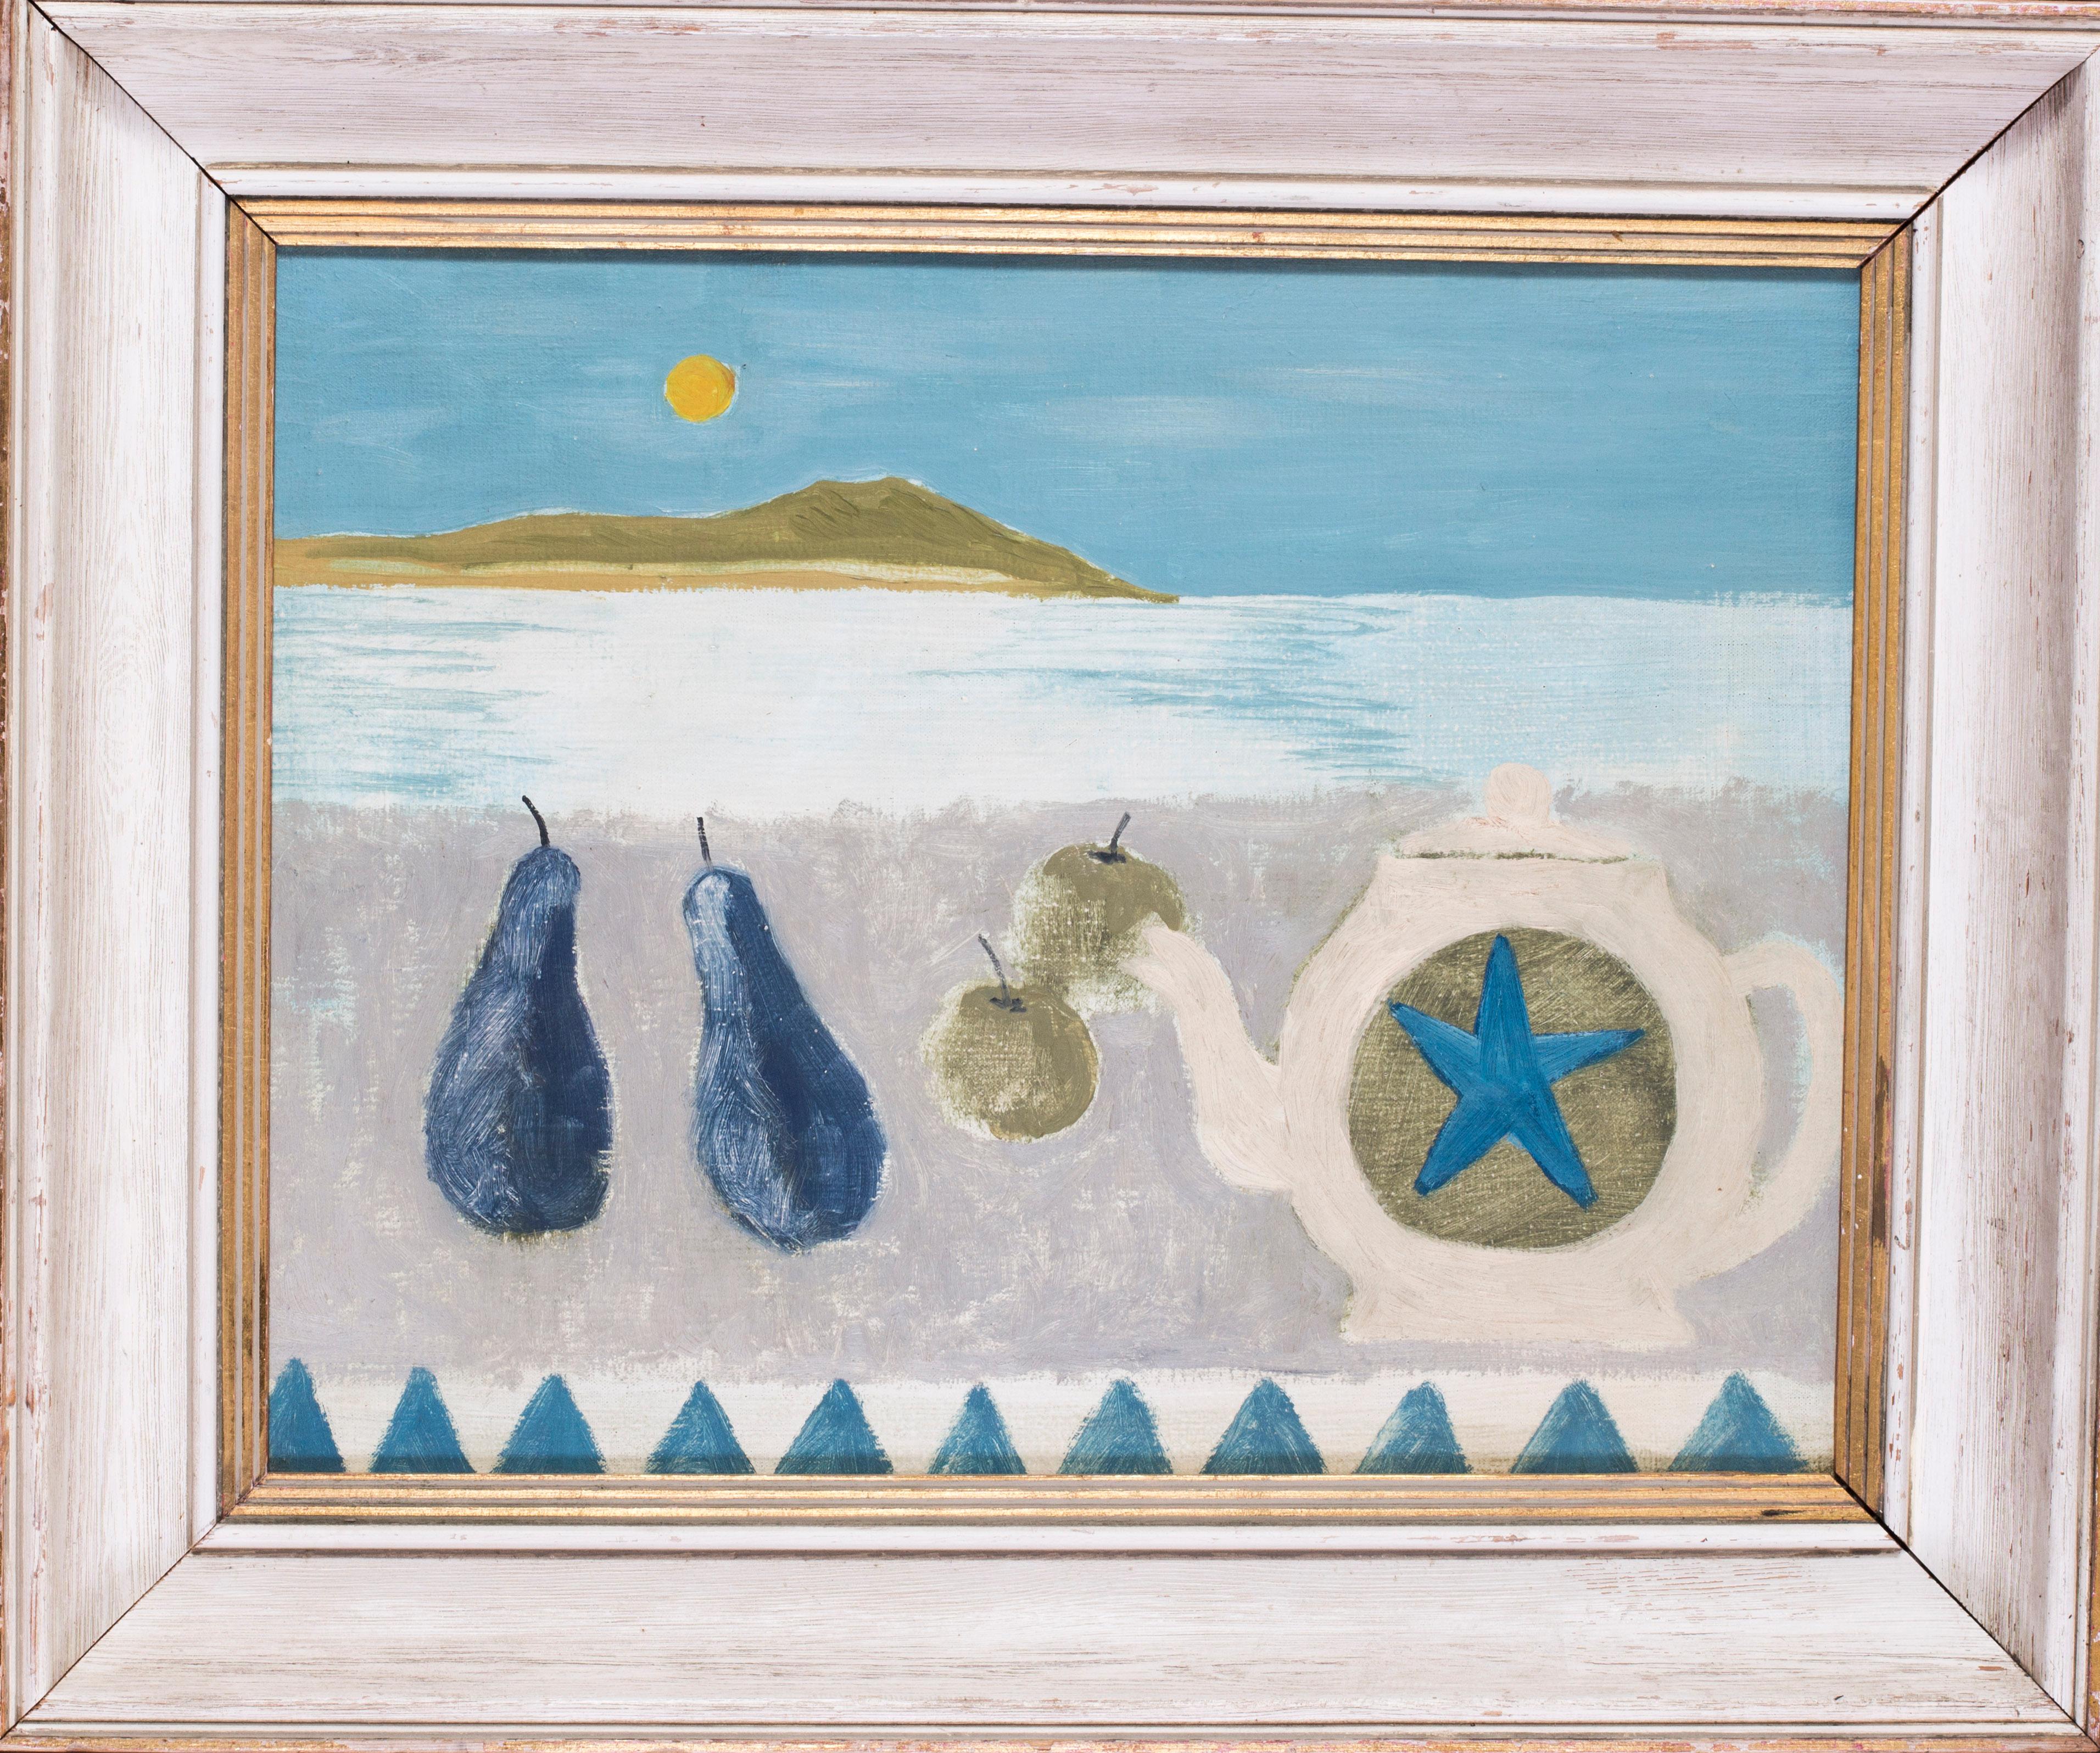 British, 20th Century abstract still life painting in the manner of Mary Fedden